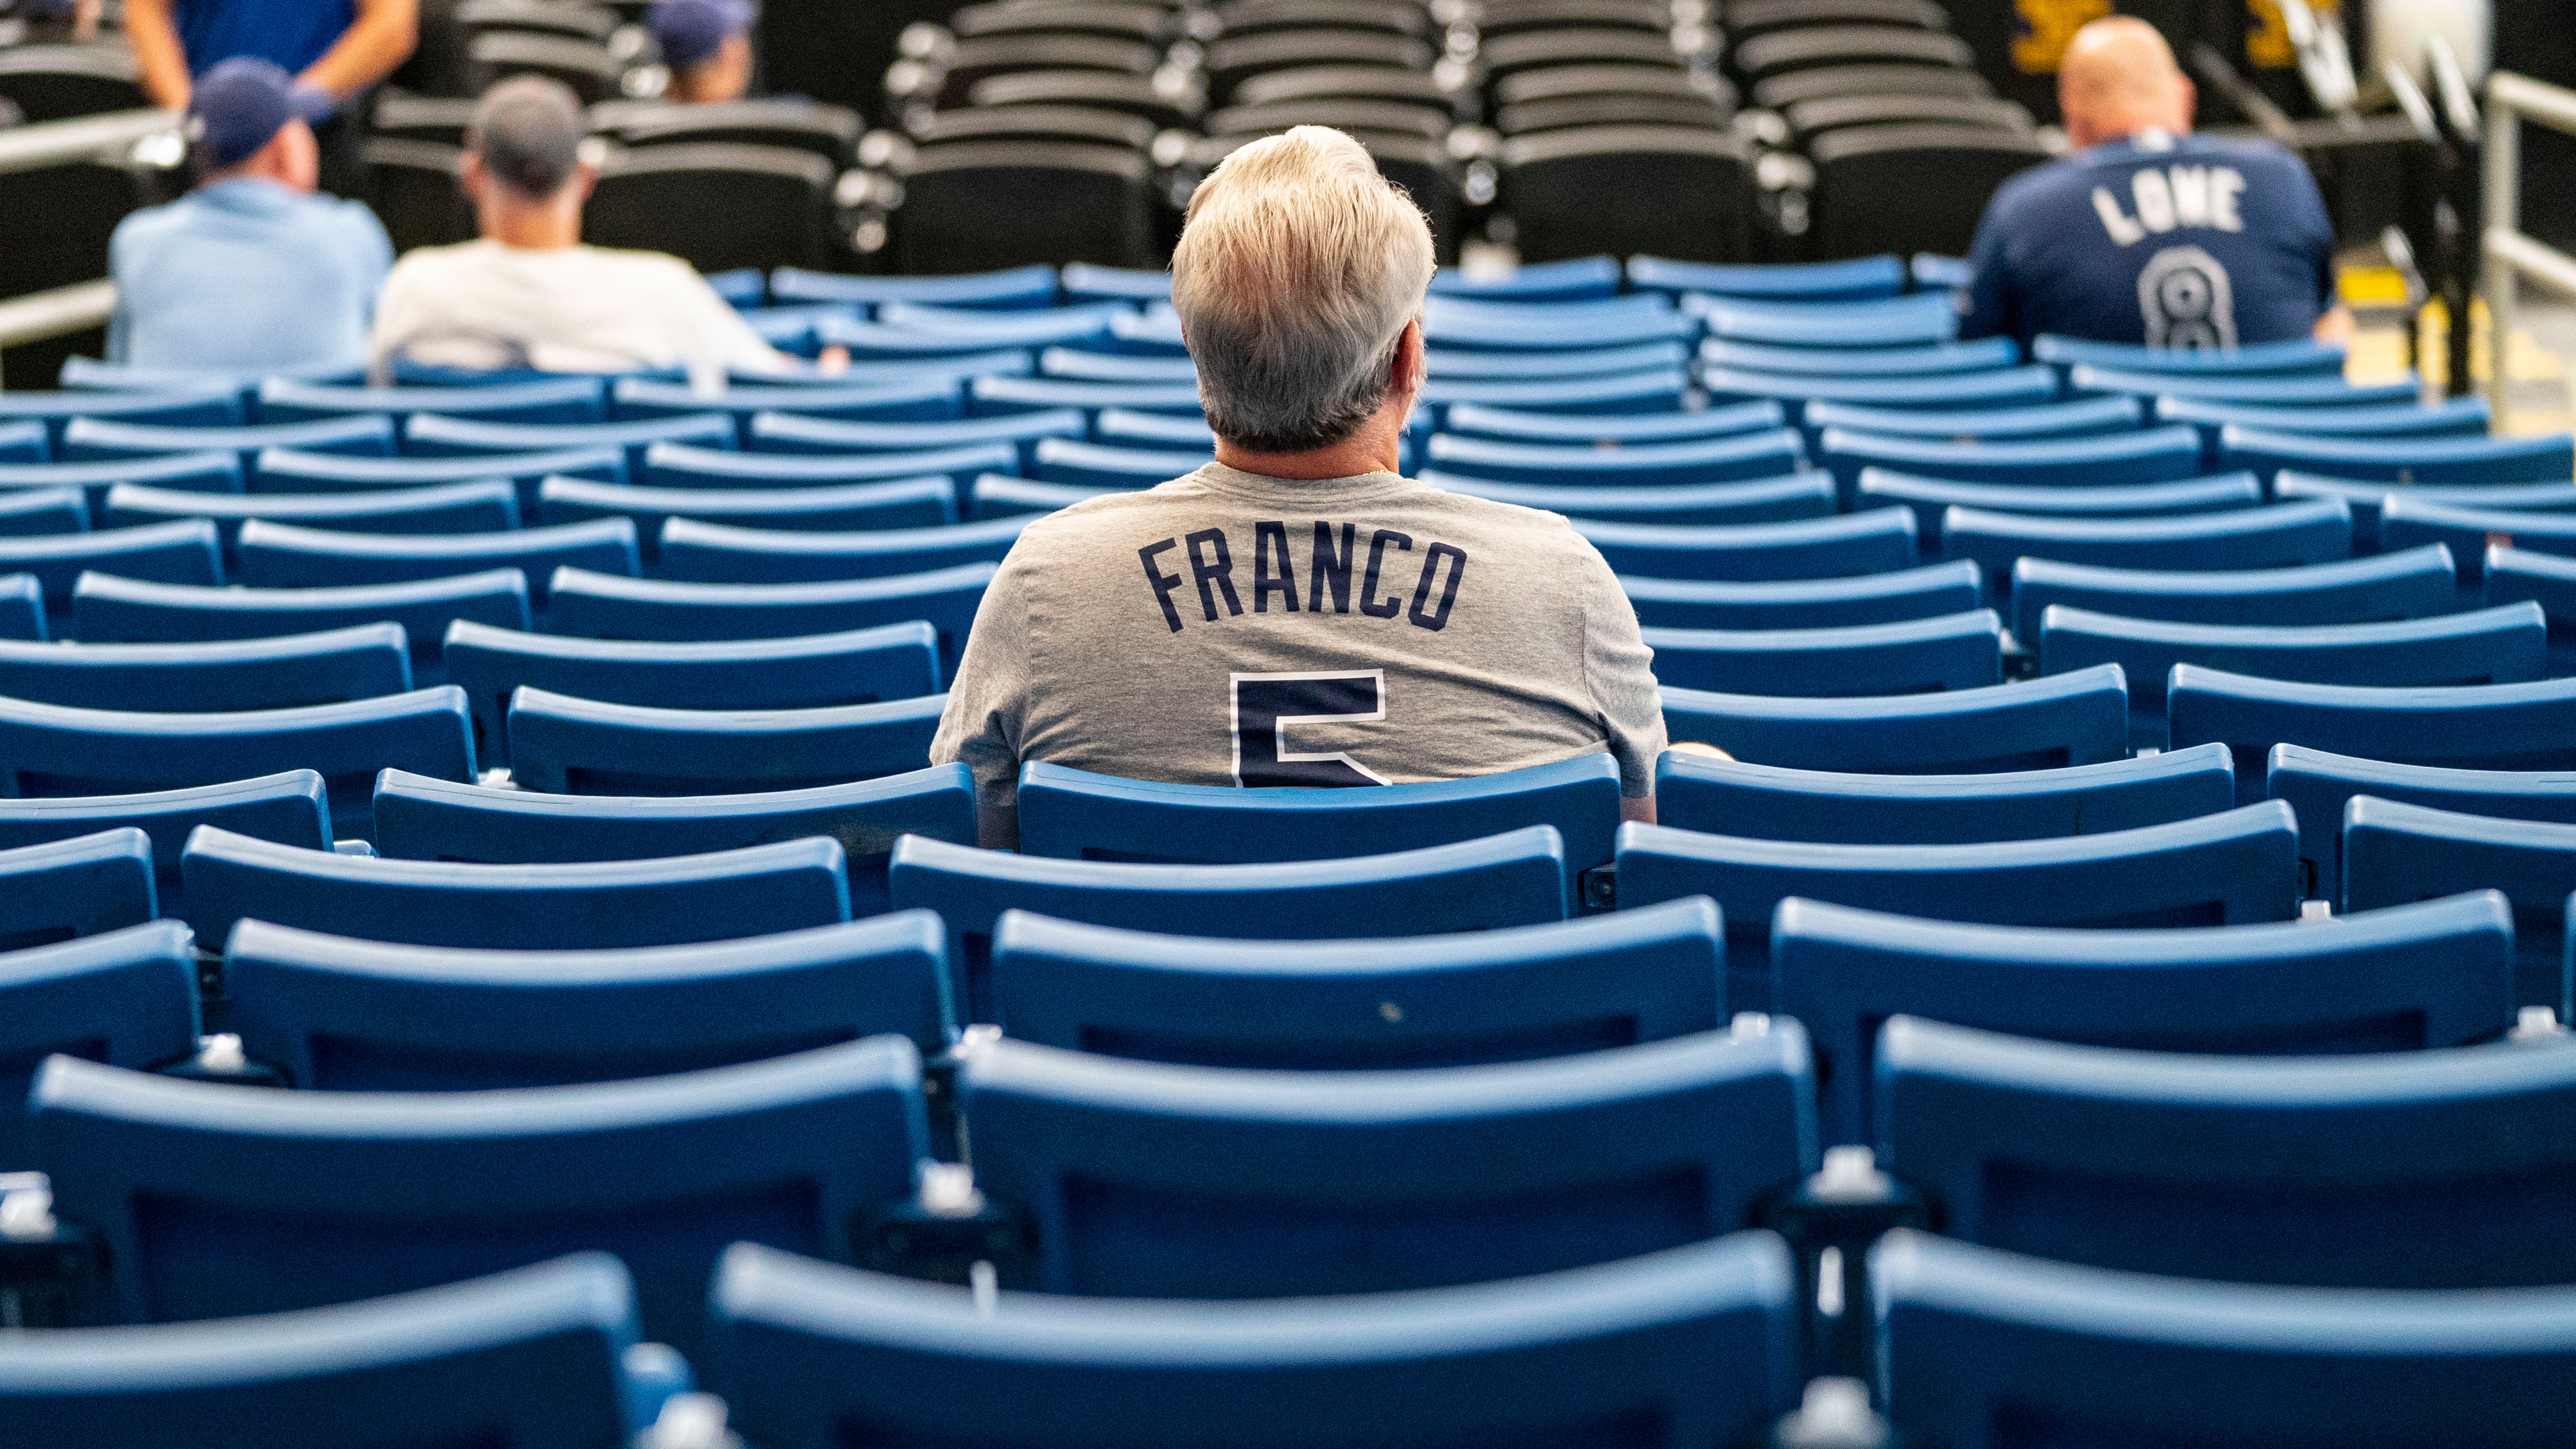 Oops! Official Renderings Of Rays' New Stadium Include Wander Franco Jersey